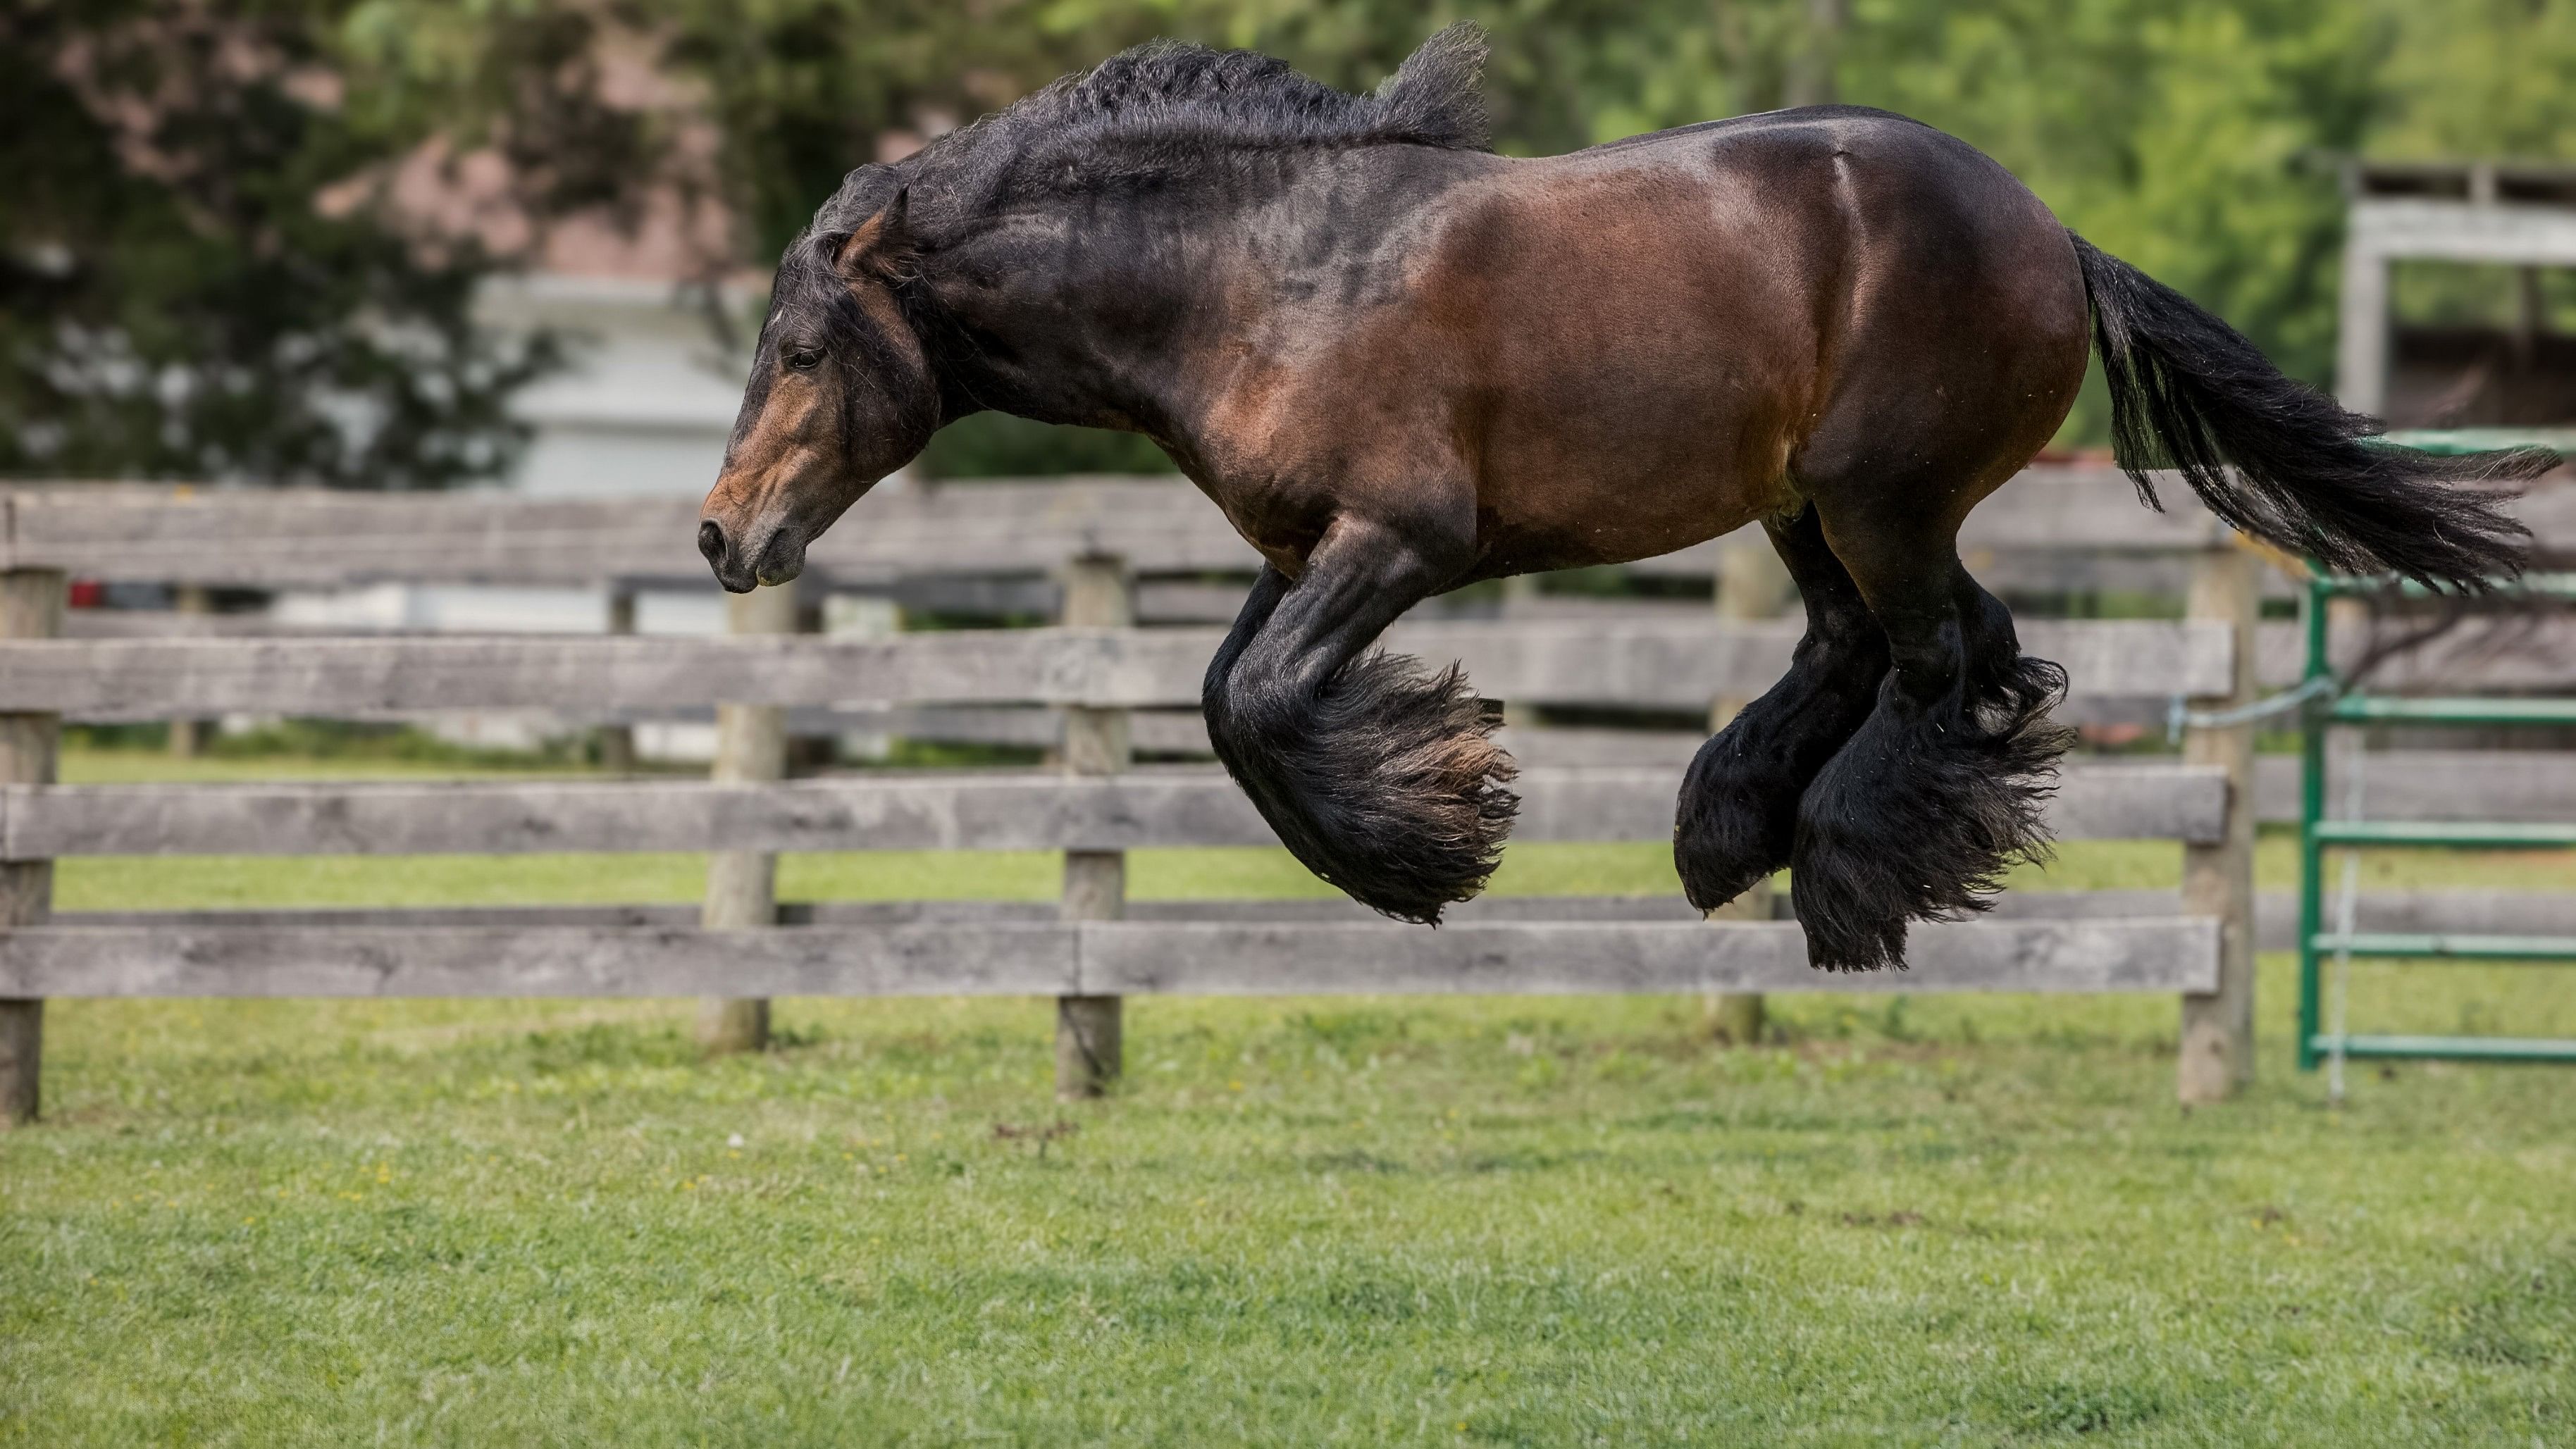 This photo titled "I think I saw a mouse" by Debby Thomas shows a horse jumping high off the ground.